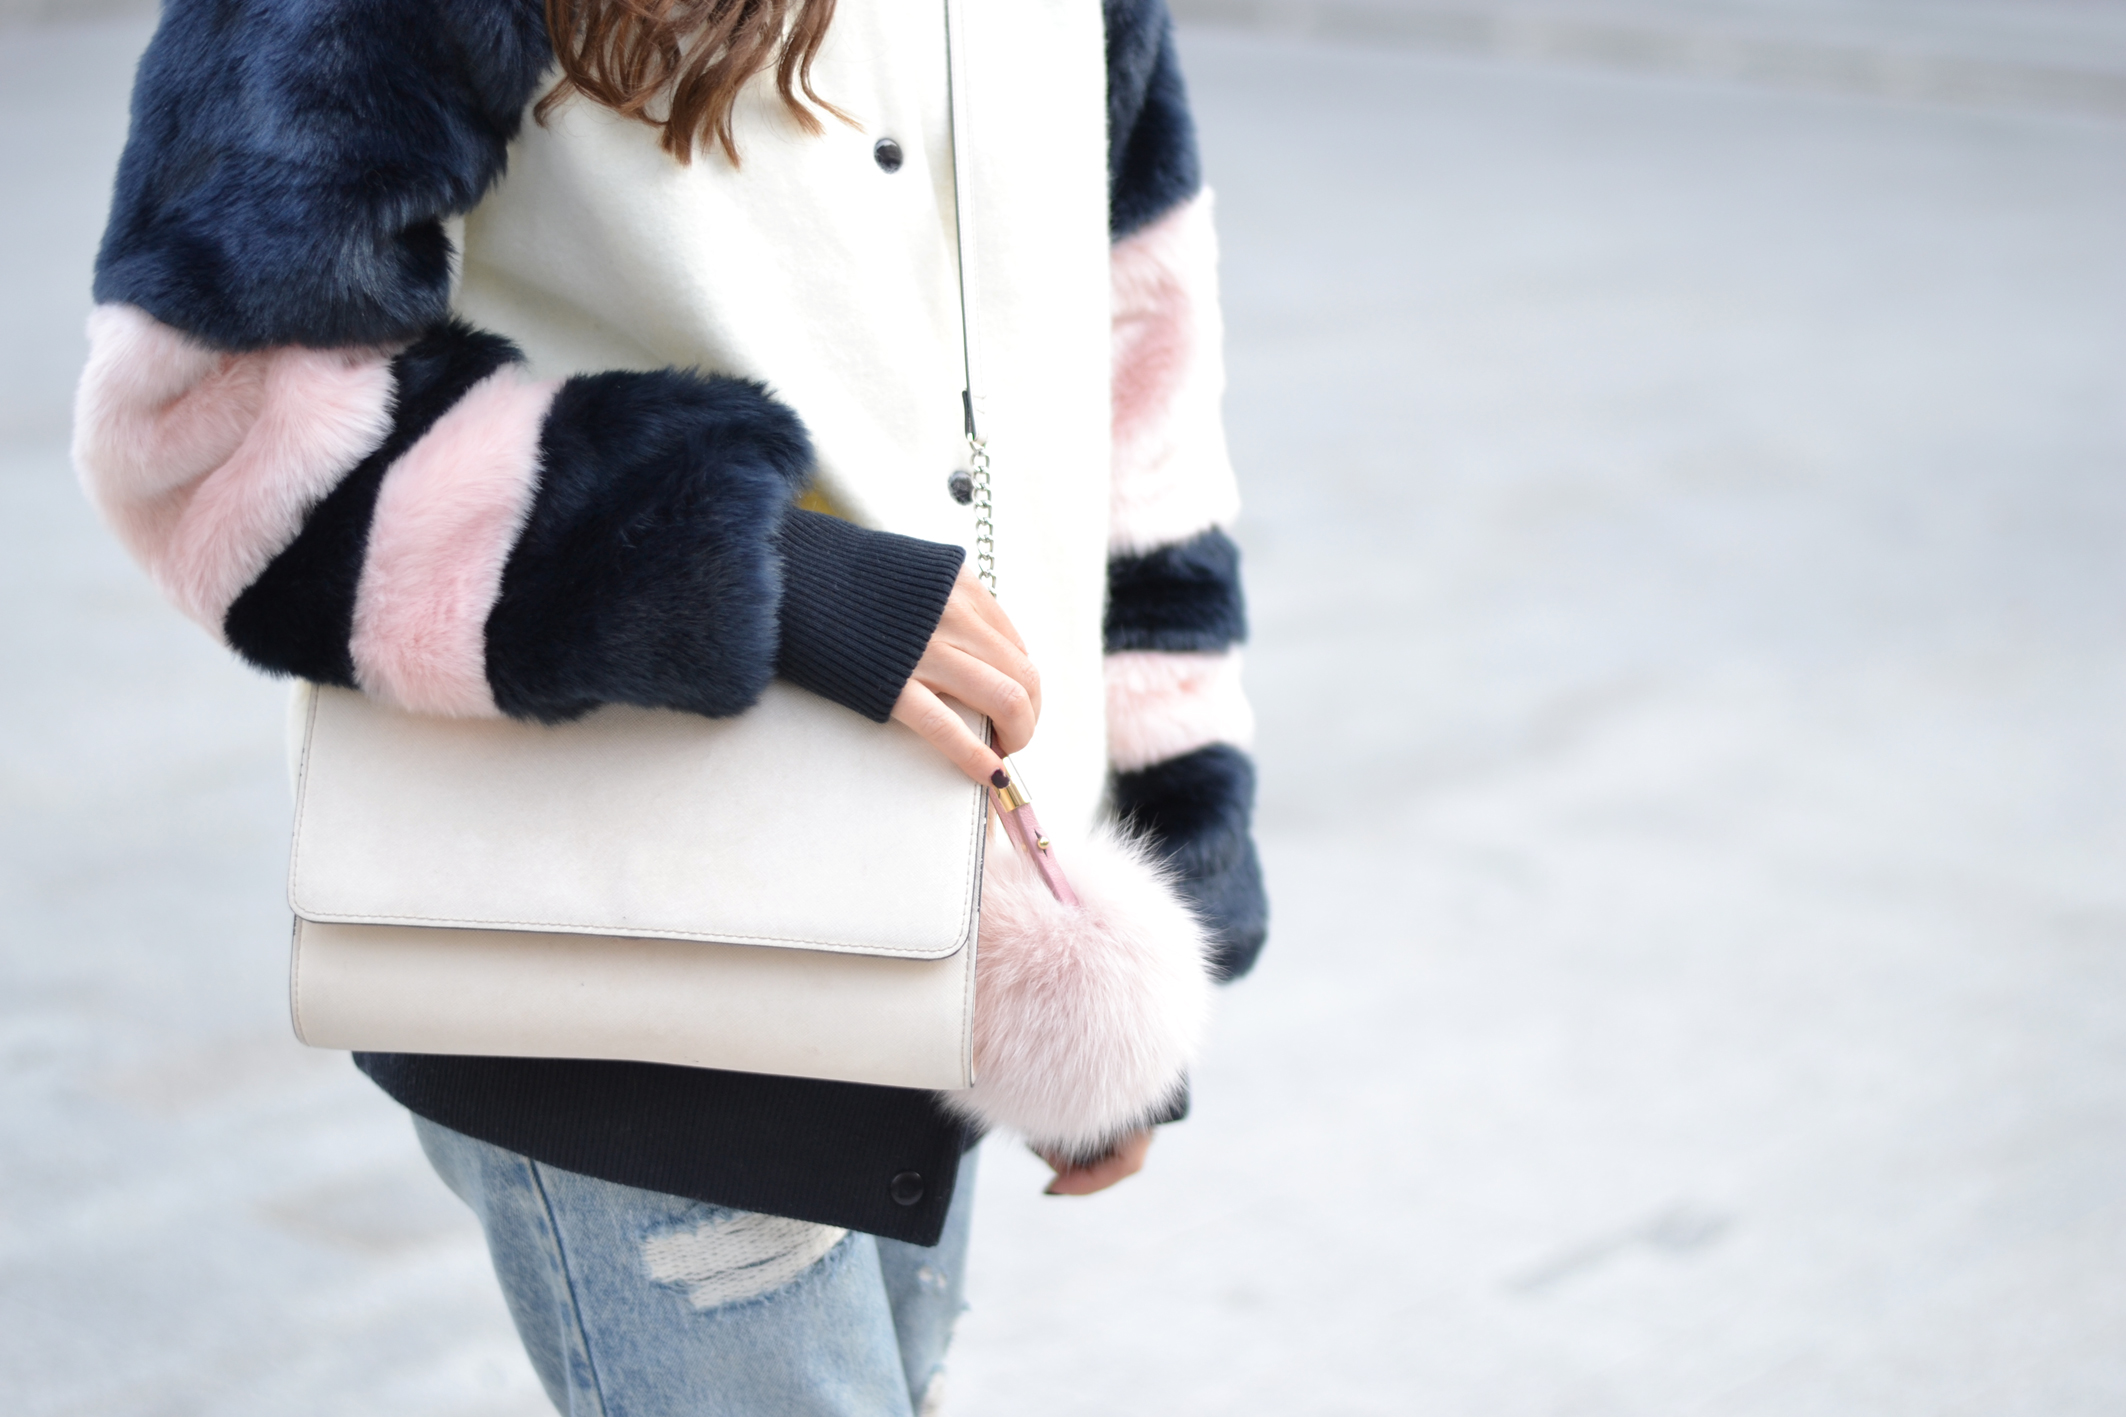 Fluffy coat, mom jeans, casual winter outfit, street style